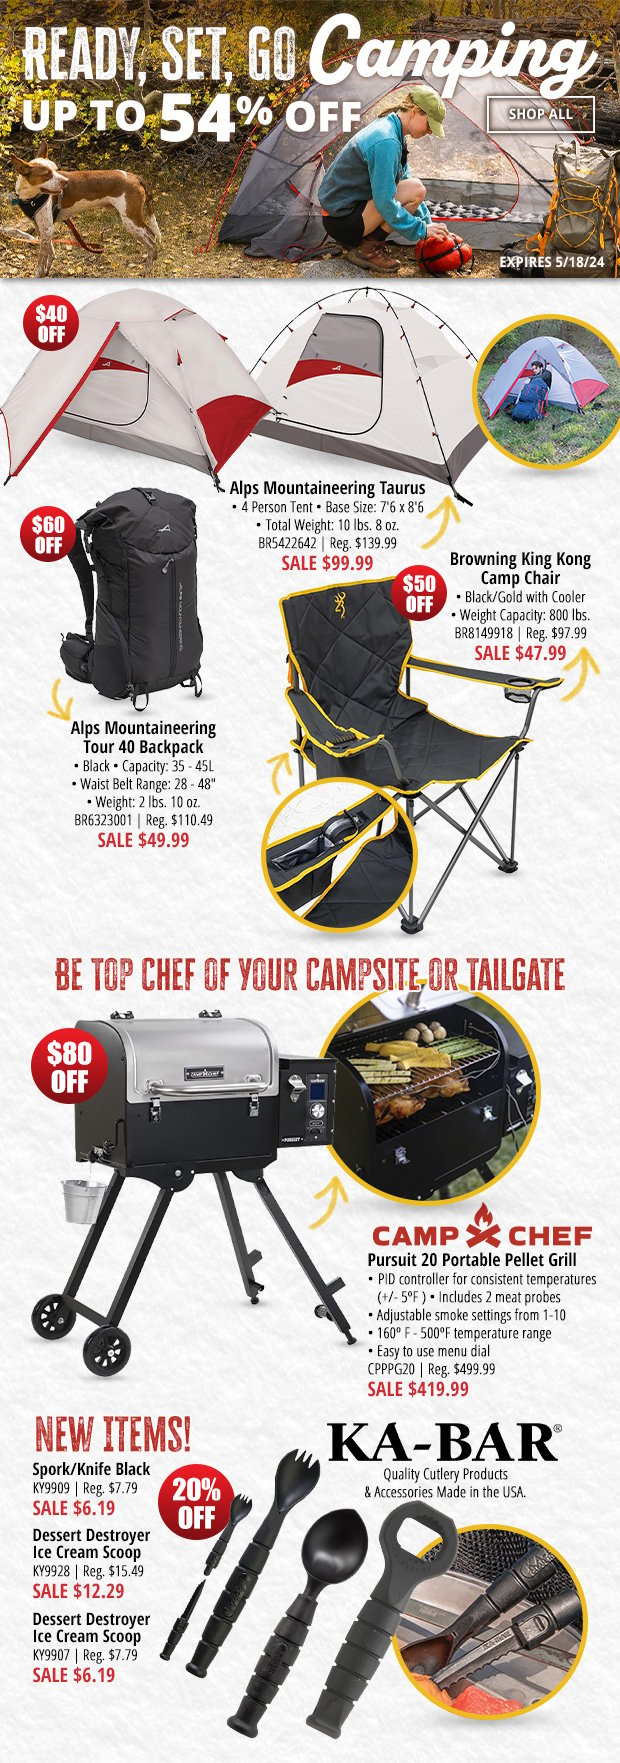 Up to 54% Off Ready, Set, Go Camping Gear!